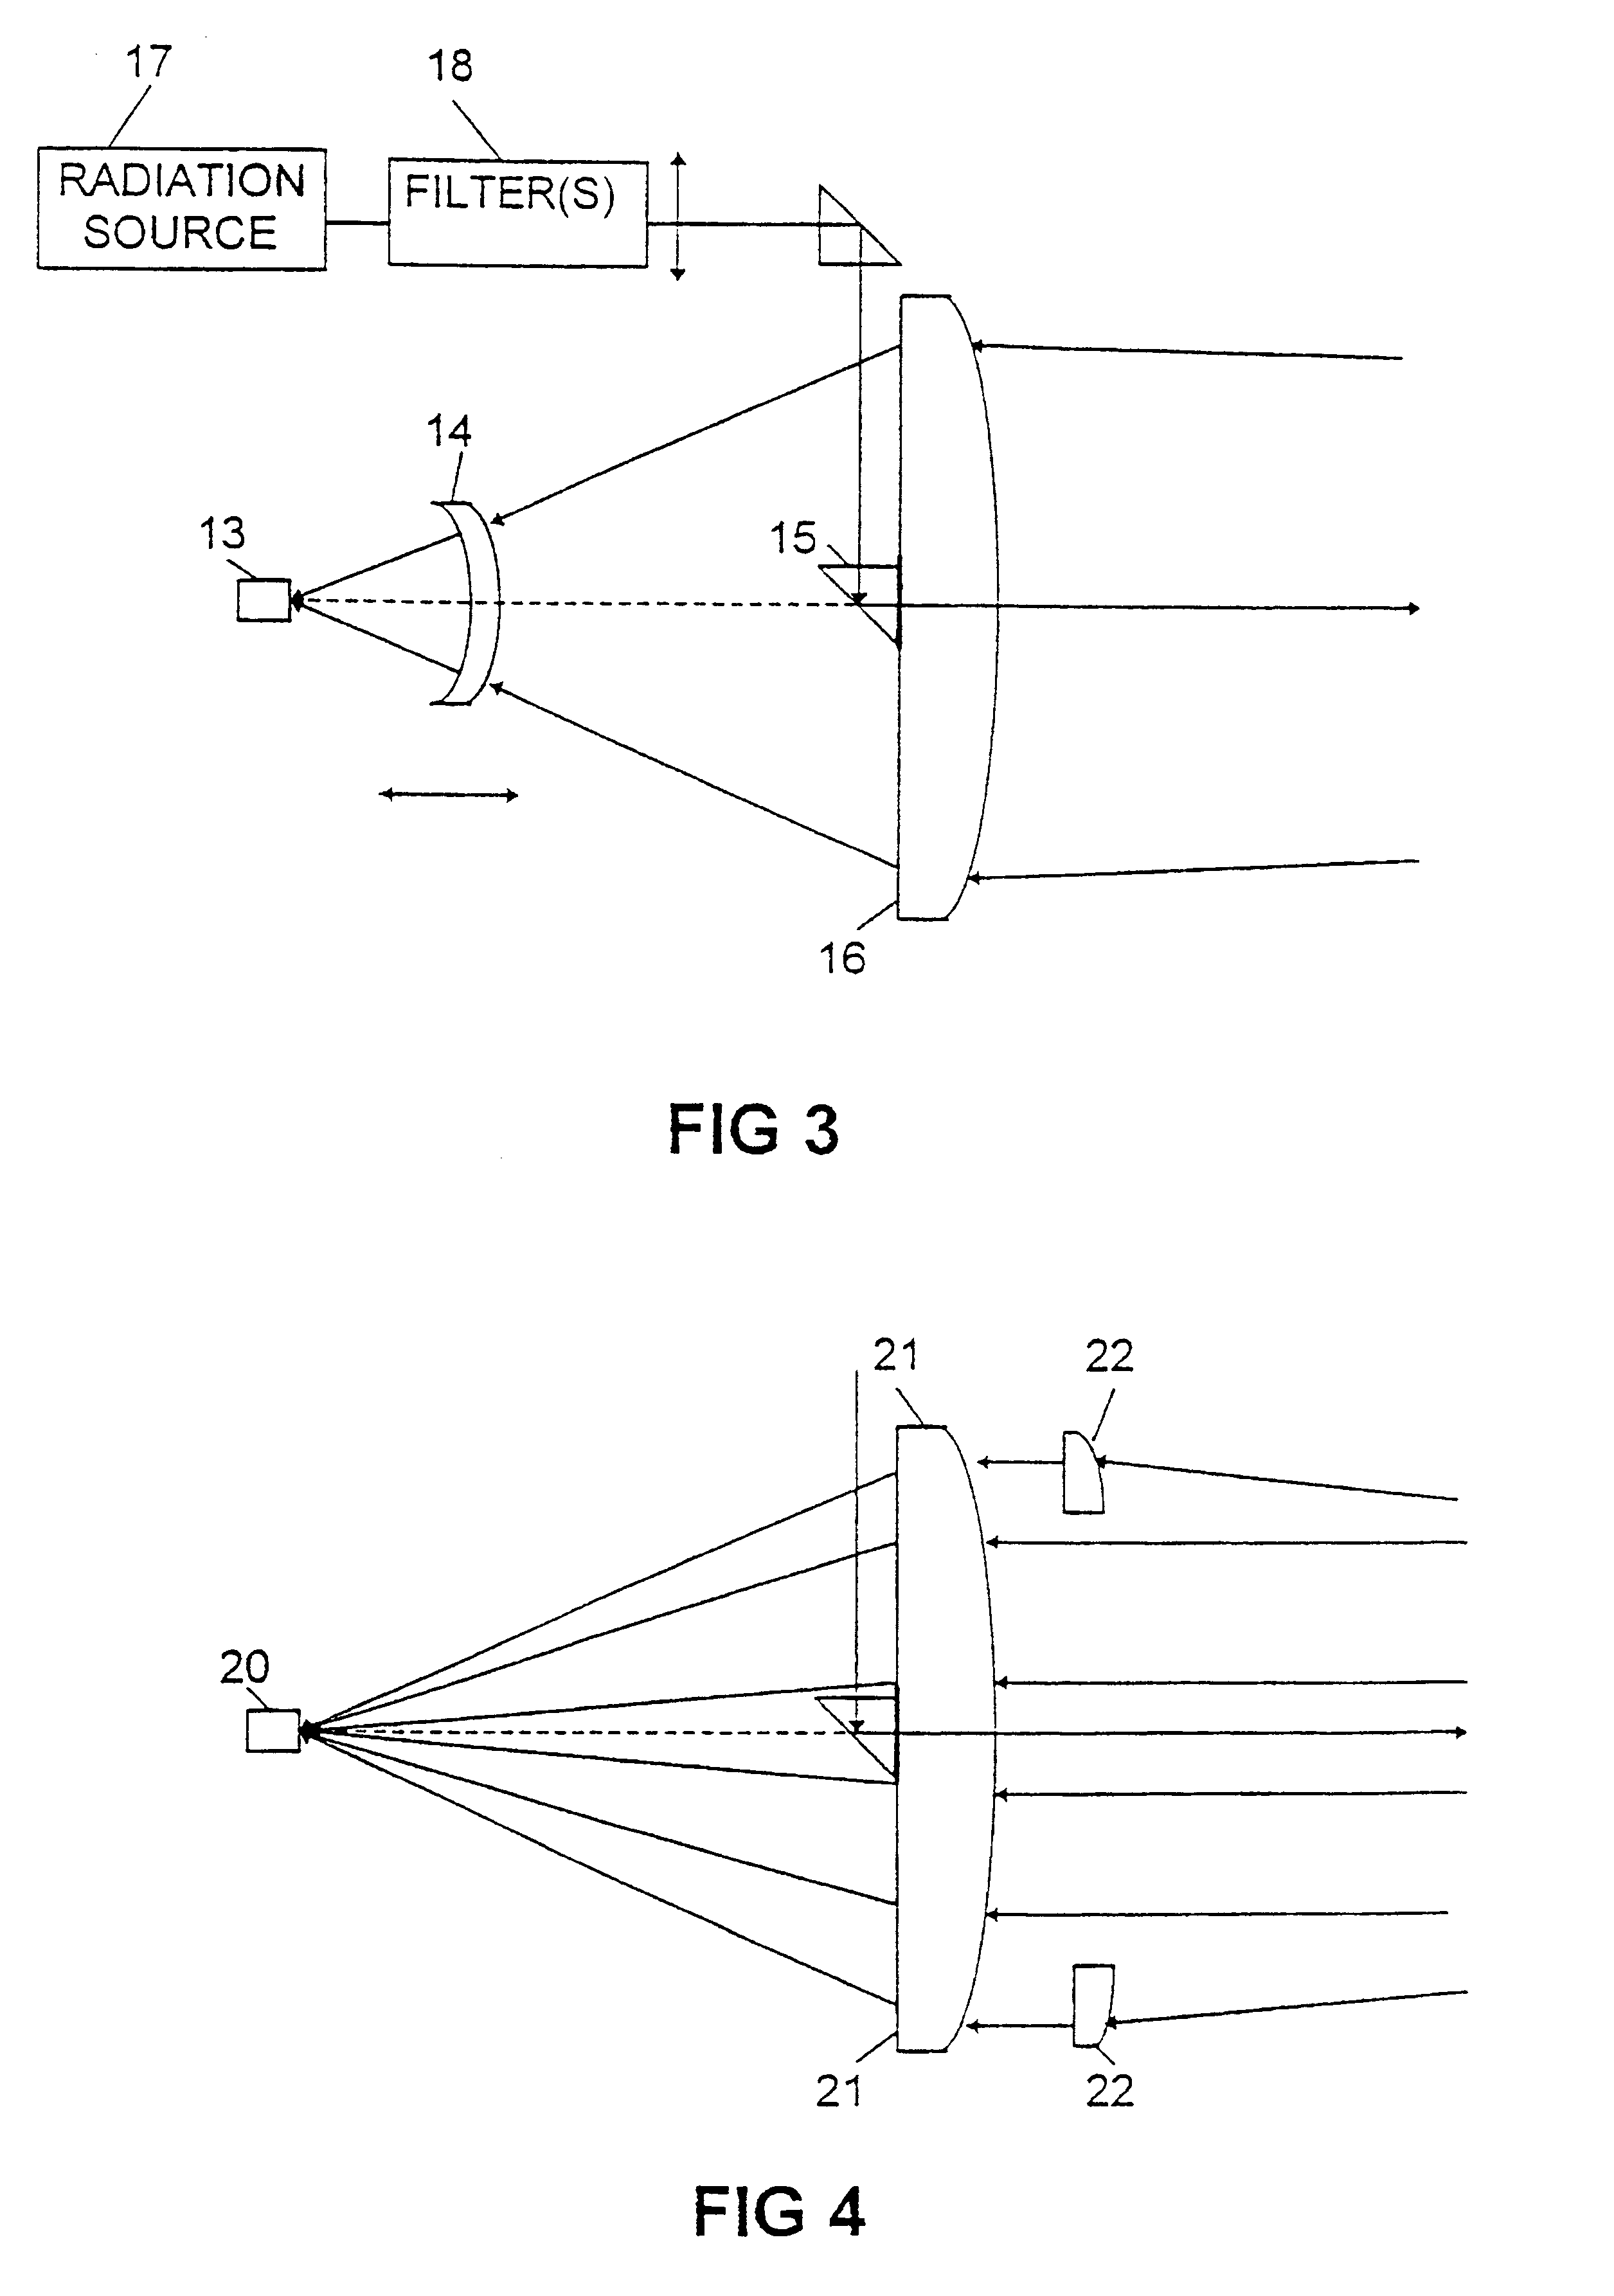 Electronic distance measuring device